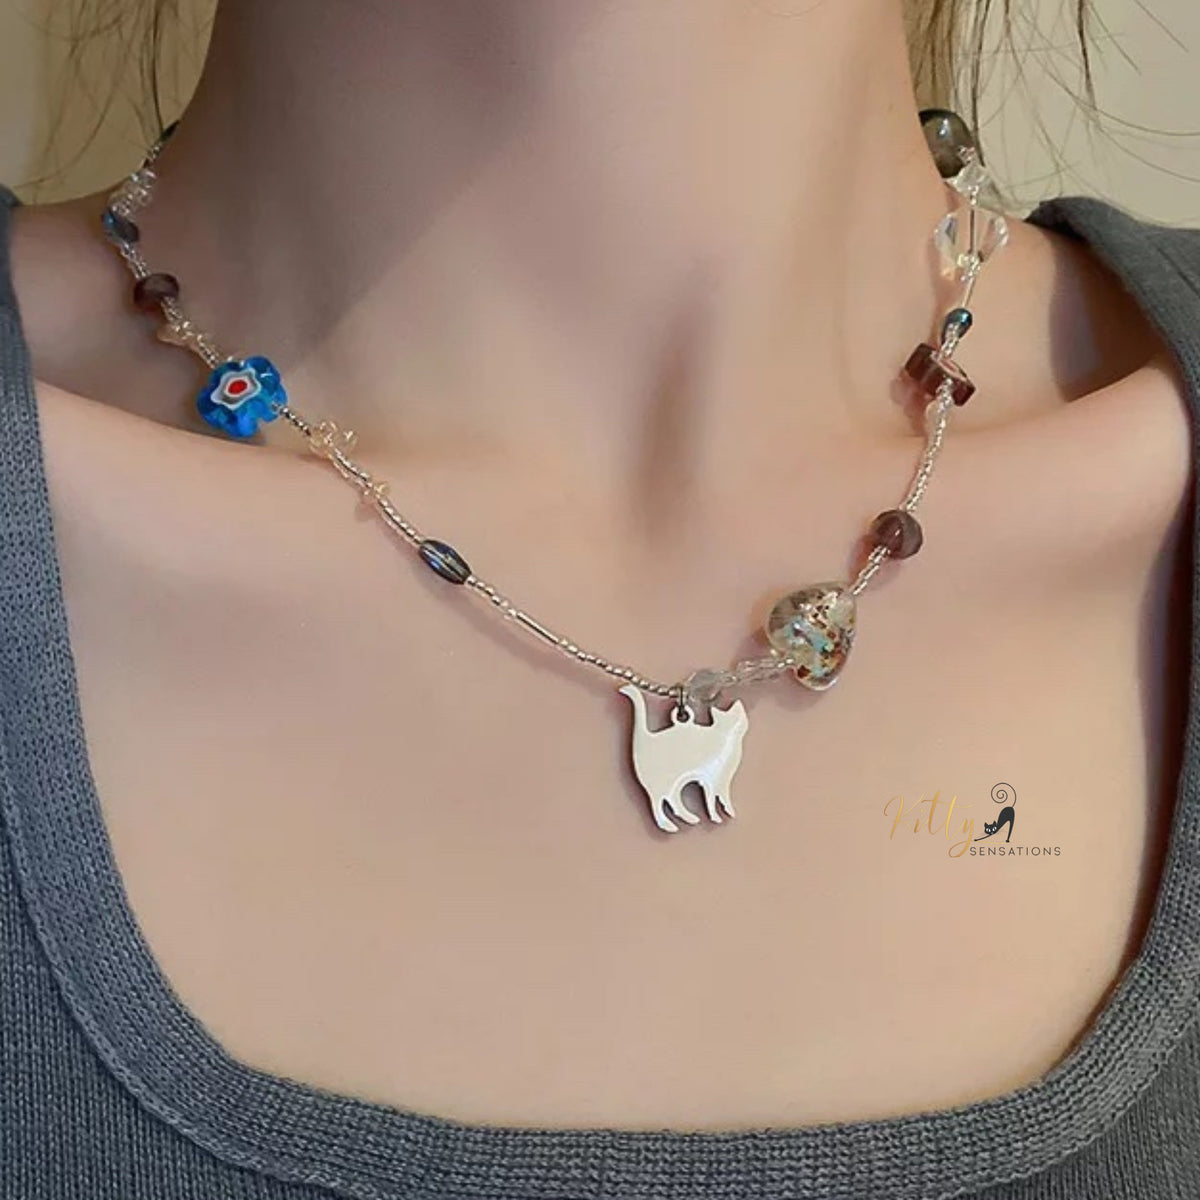 Kitty Beads Necklace in Acrylic and Metal